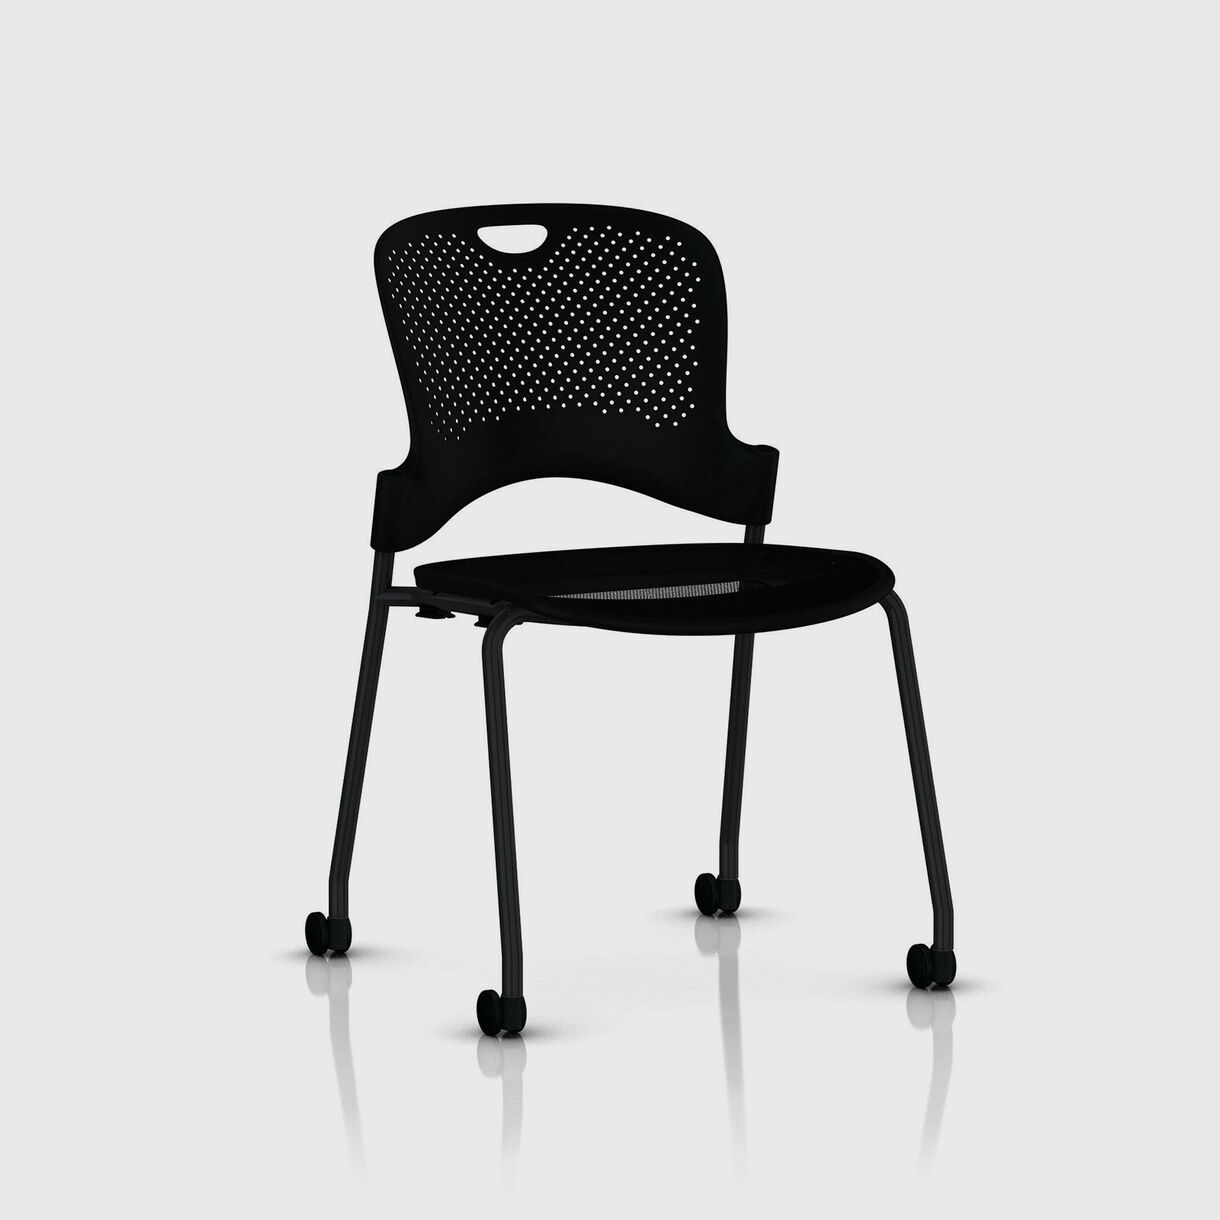 Caper Stacking Chair, Flexnet Seat - Black with Casters - No Arms